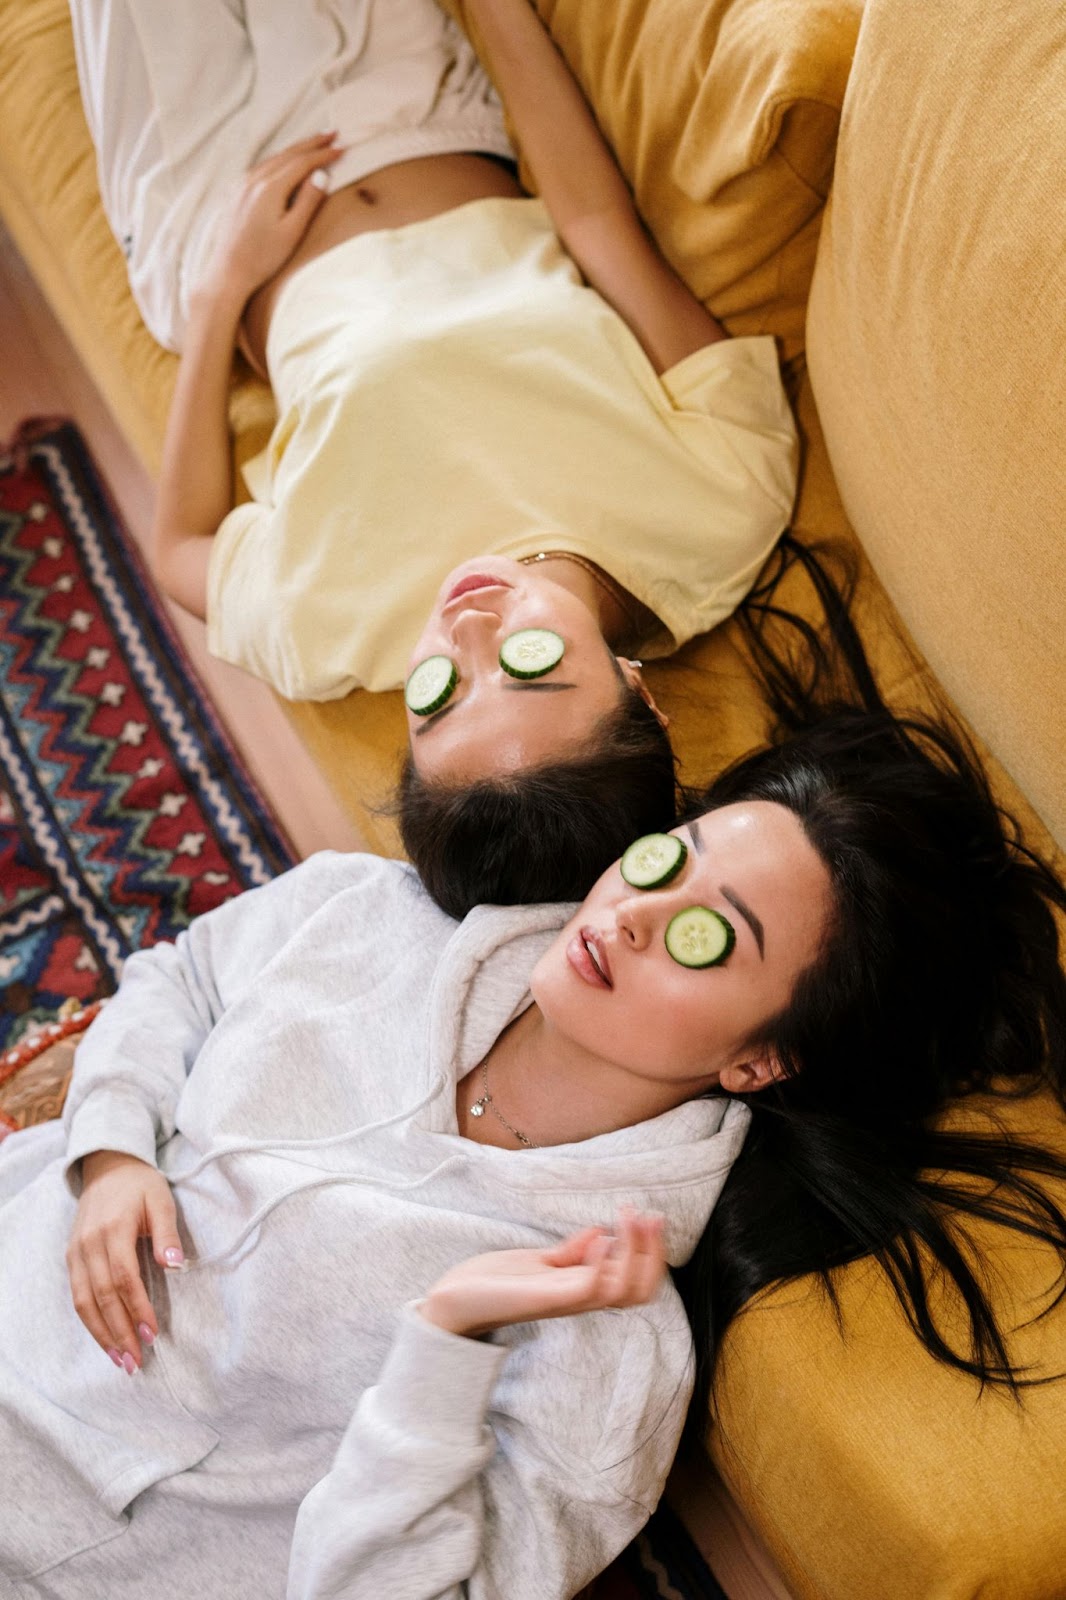 Two young girls lying on the couch relaxing wearing soothing cucumber slices on their eyes.